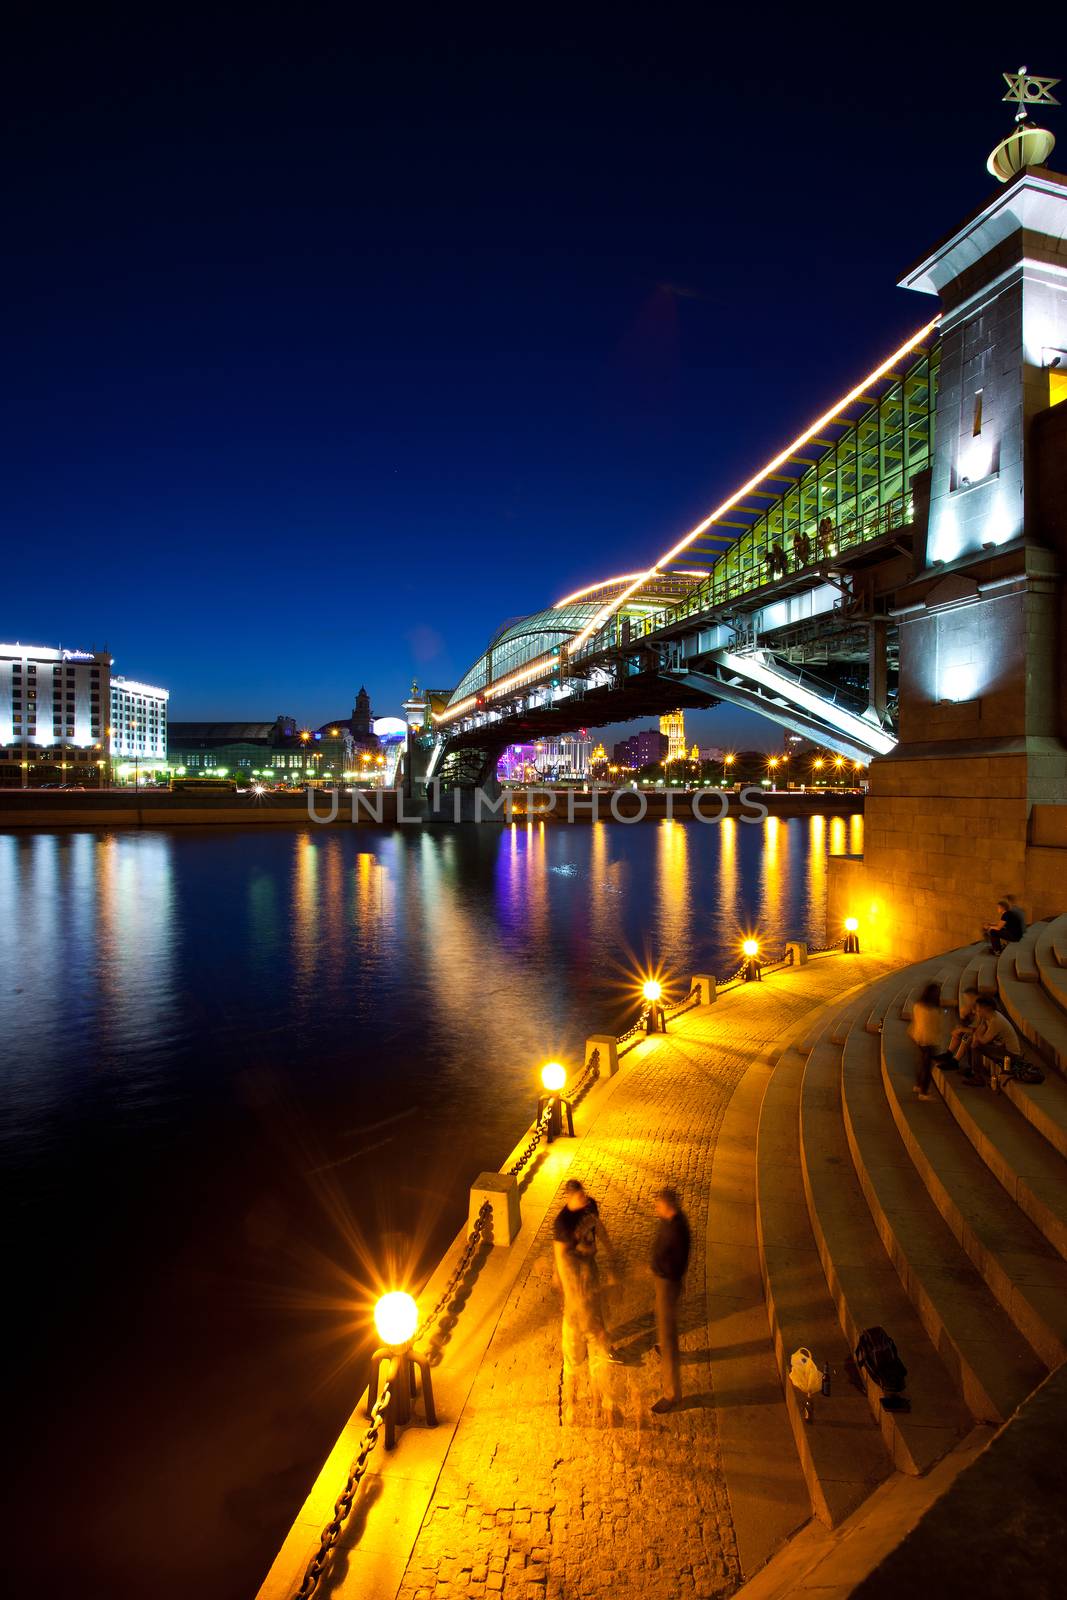 moscow city night landscape with a bridge over the river, 22.05.2014, editorial use only